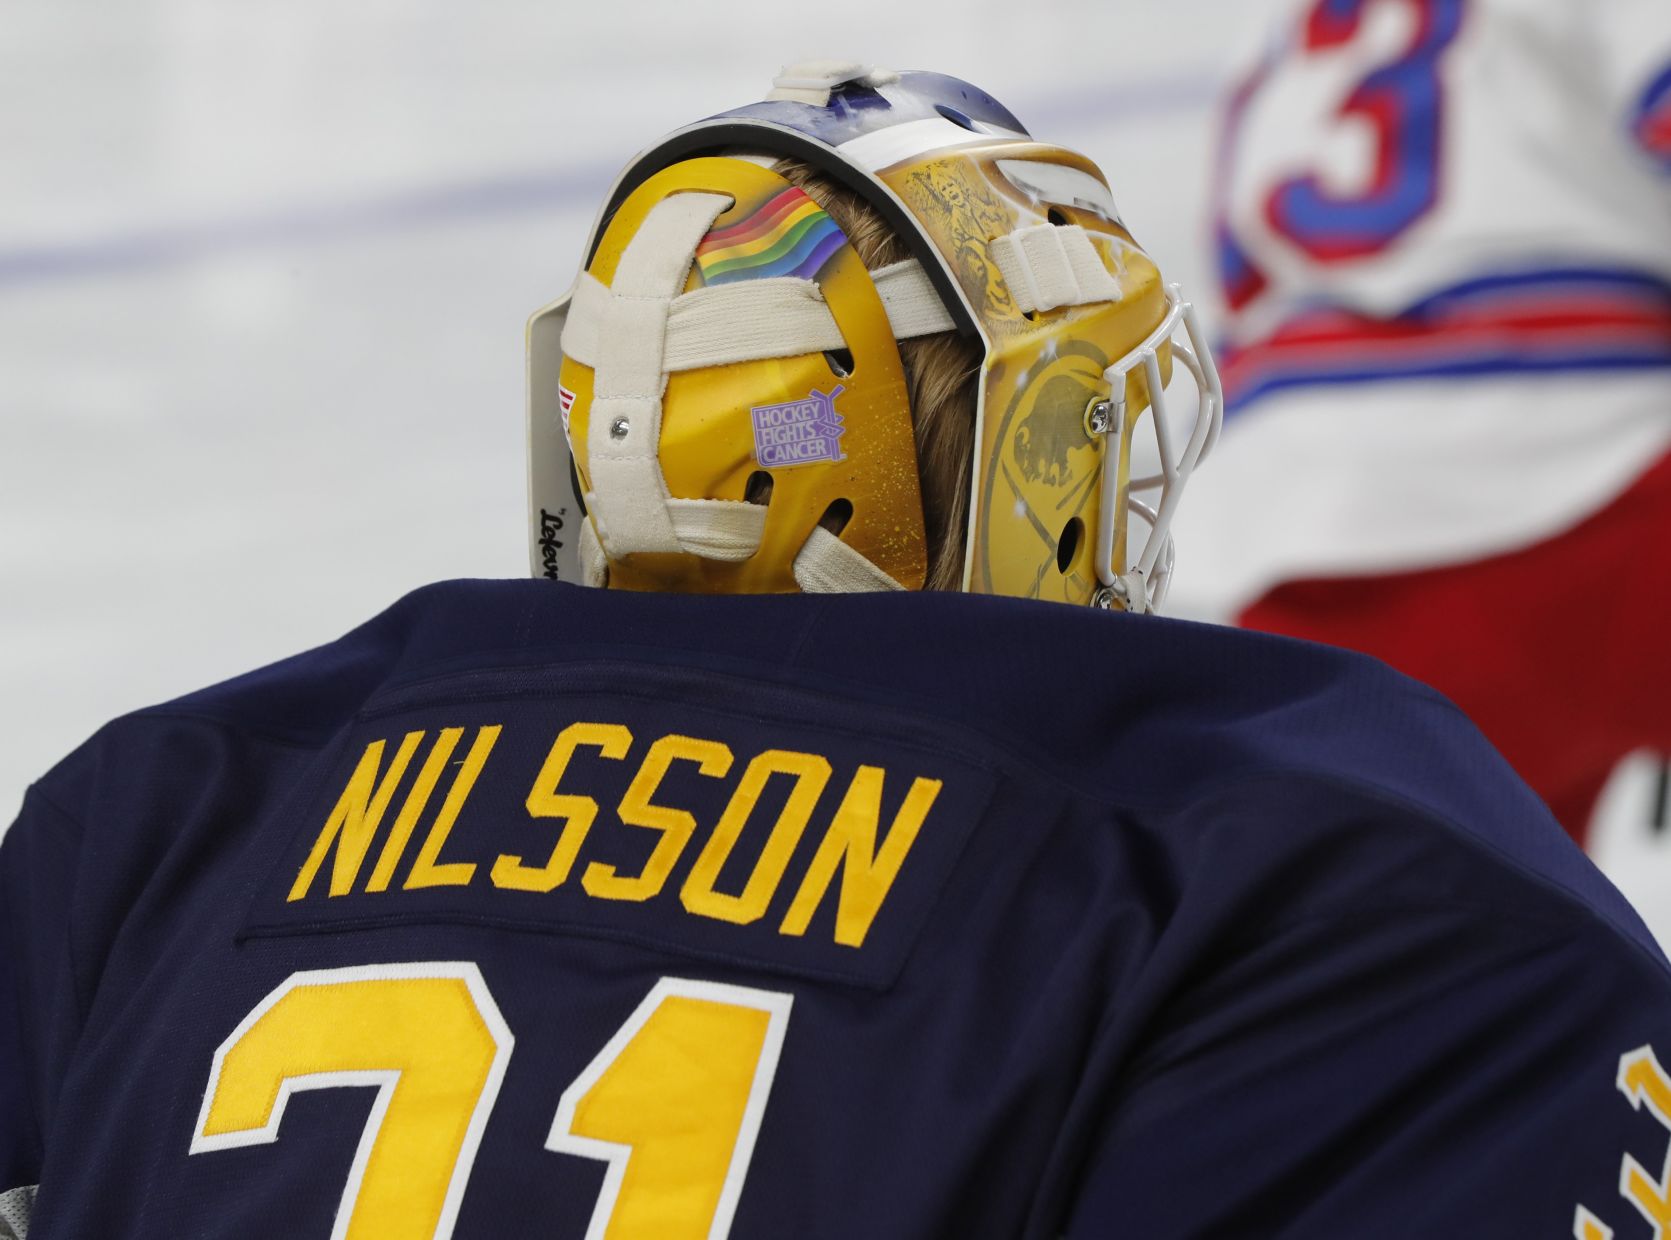 anders nilsson jersey